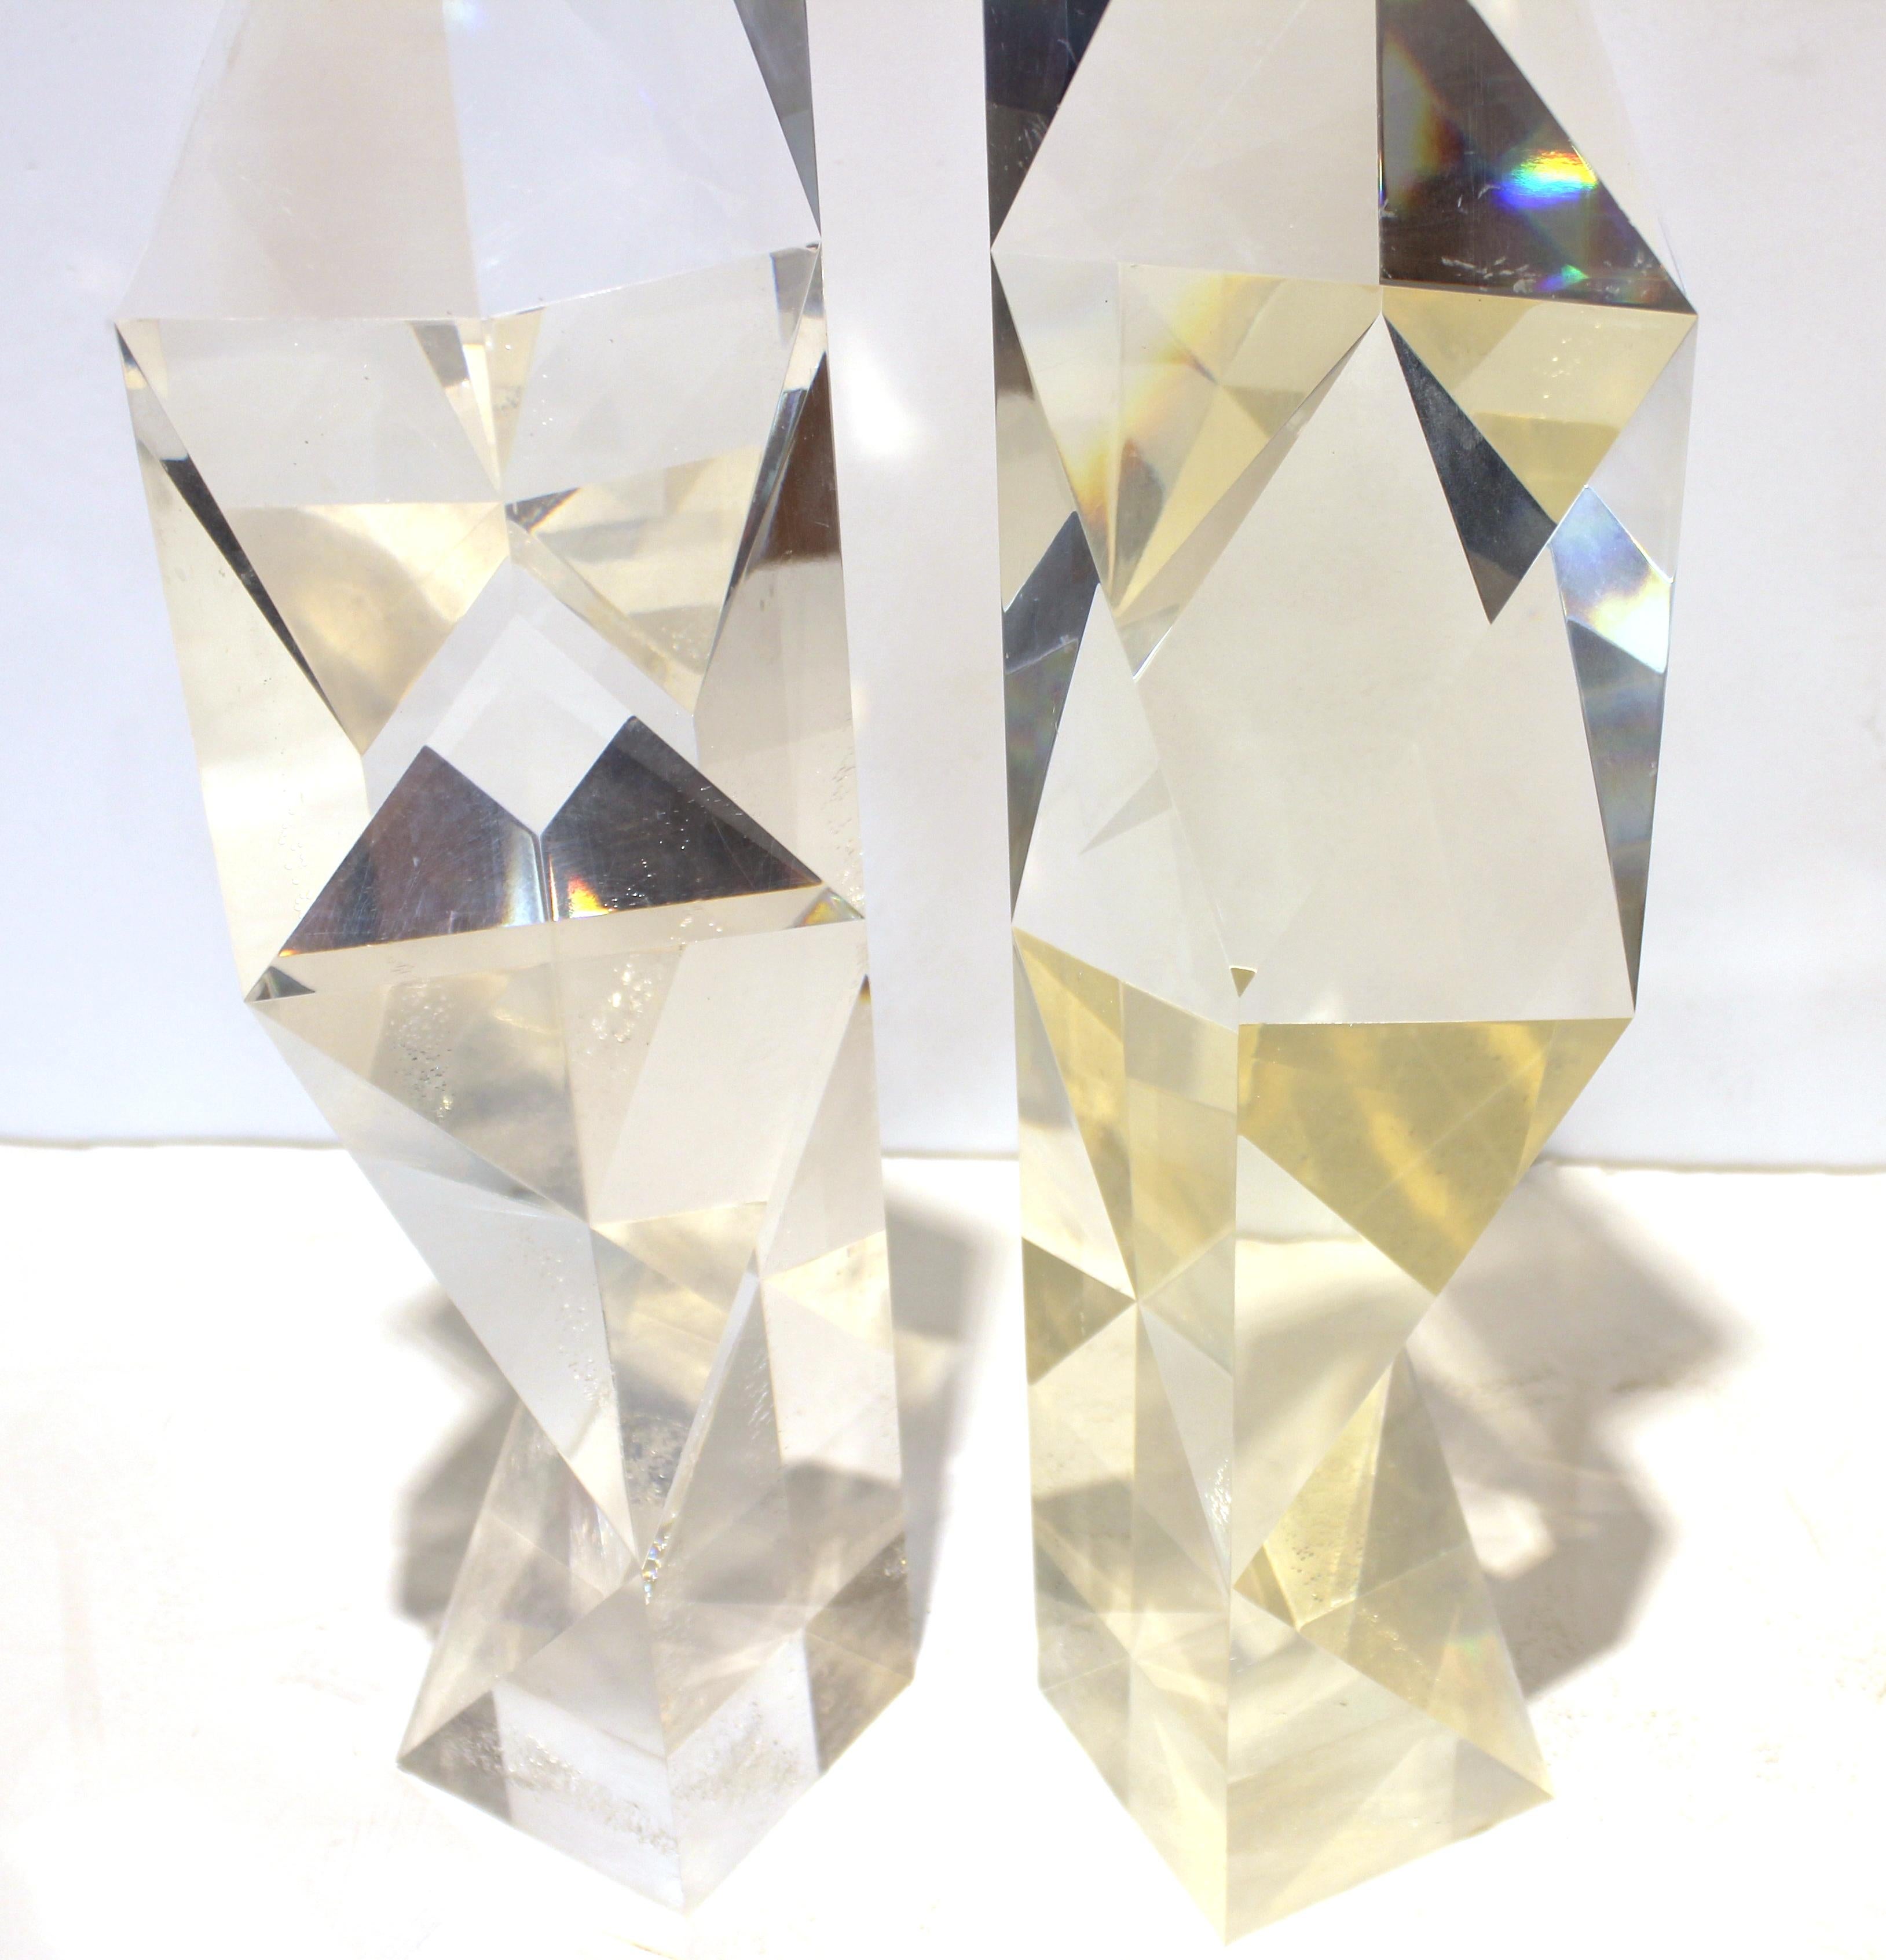 Late 20th Century Alessio Tasca Italian Modern Abstract Lucite 'Fusina' Prism Sculptures For Sale